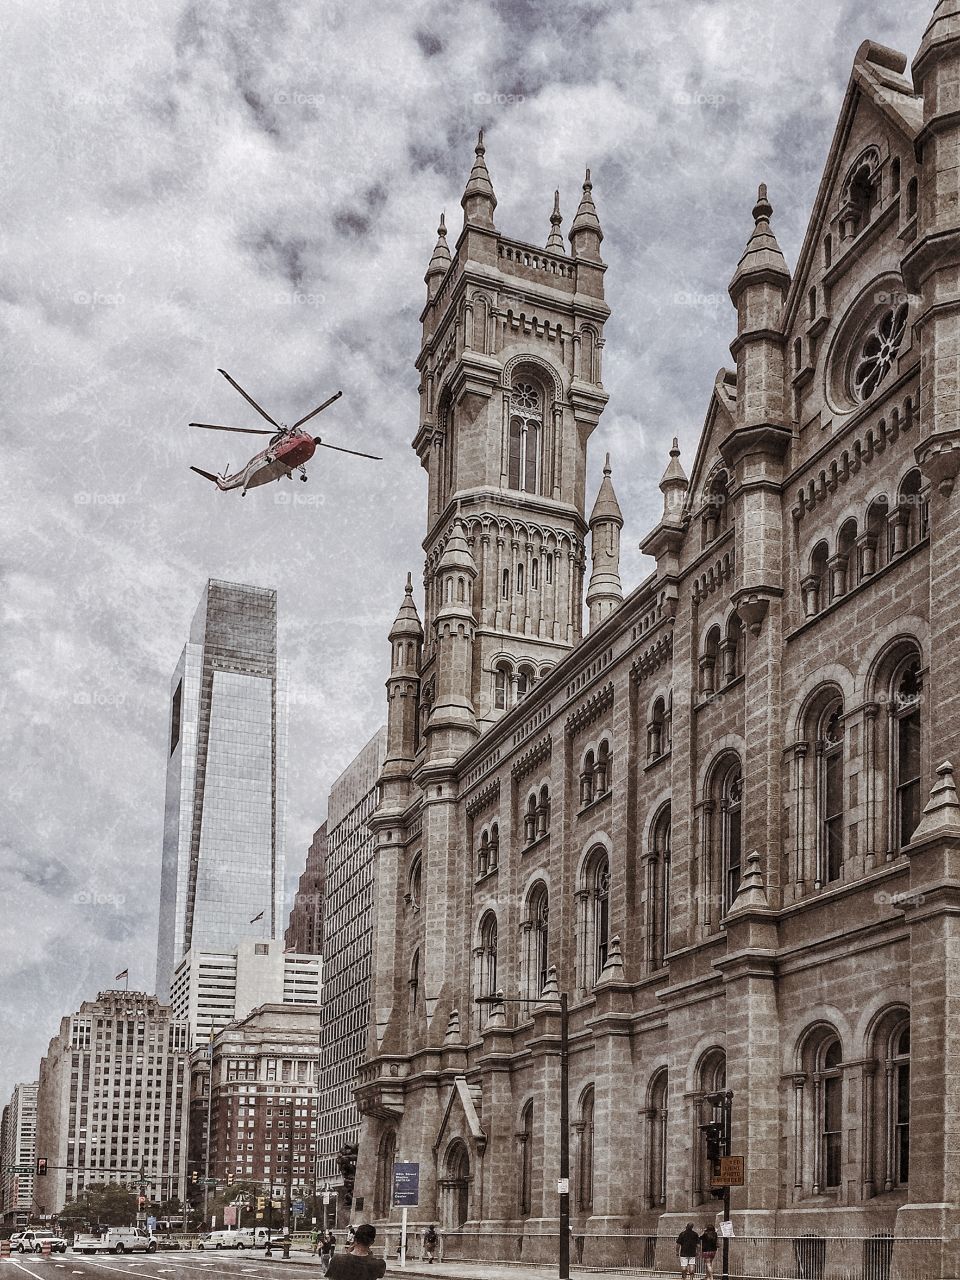 Red helicopter in the city